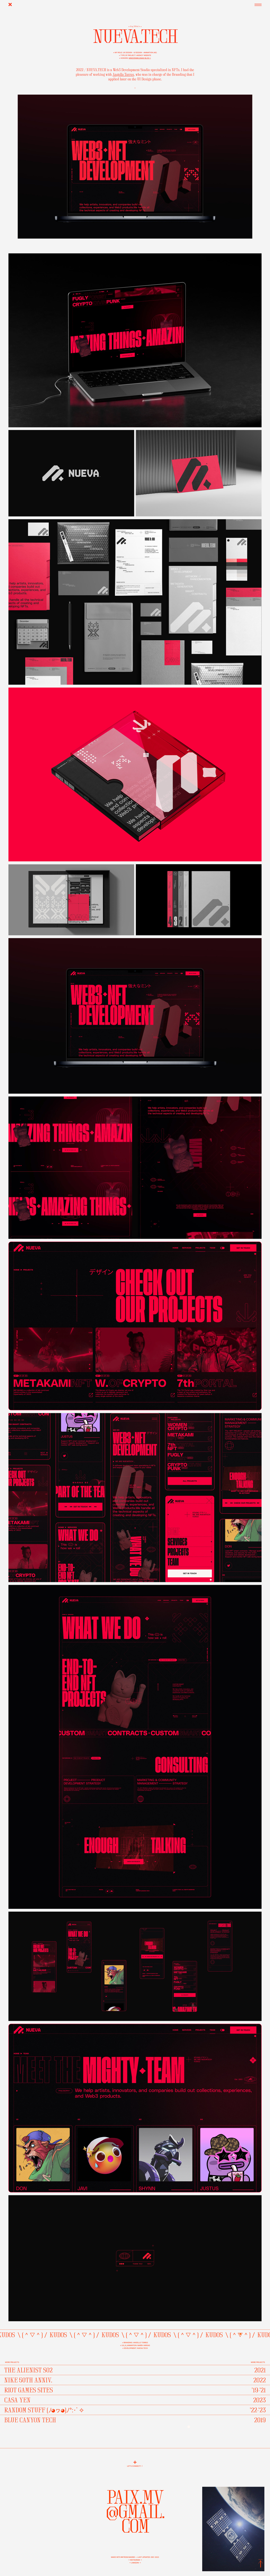 PaixDsgn Landing Page Example: I'm a Freelance UI Designer & Art Director passionate about crafting creative digital experiences. This is a showcase of my professional and personal work - I hope you enjoy it.